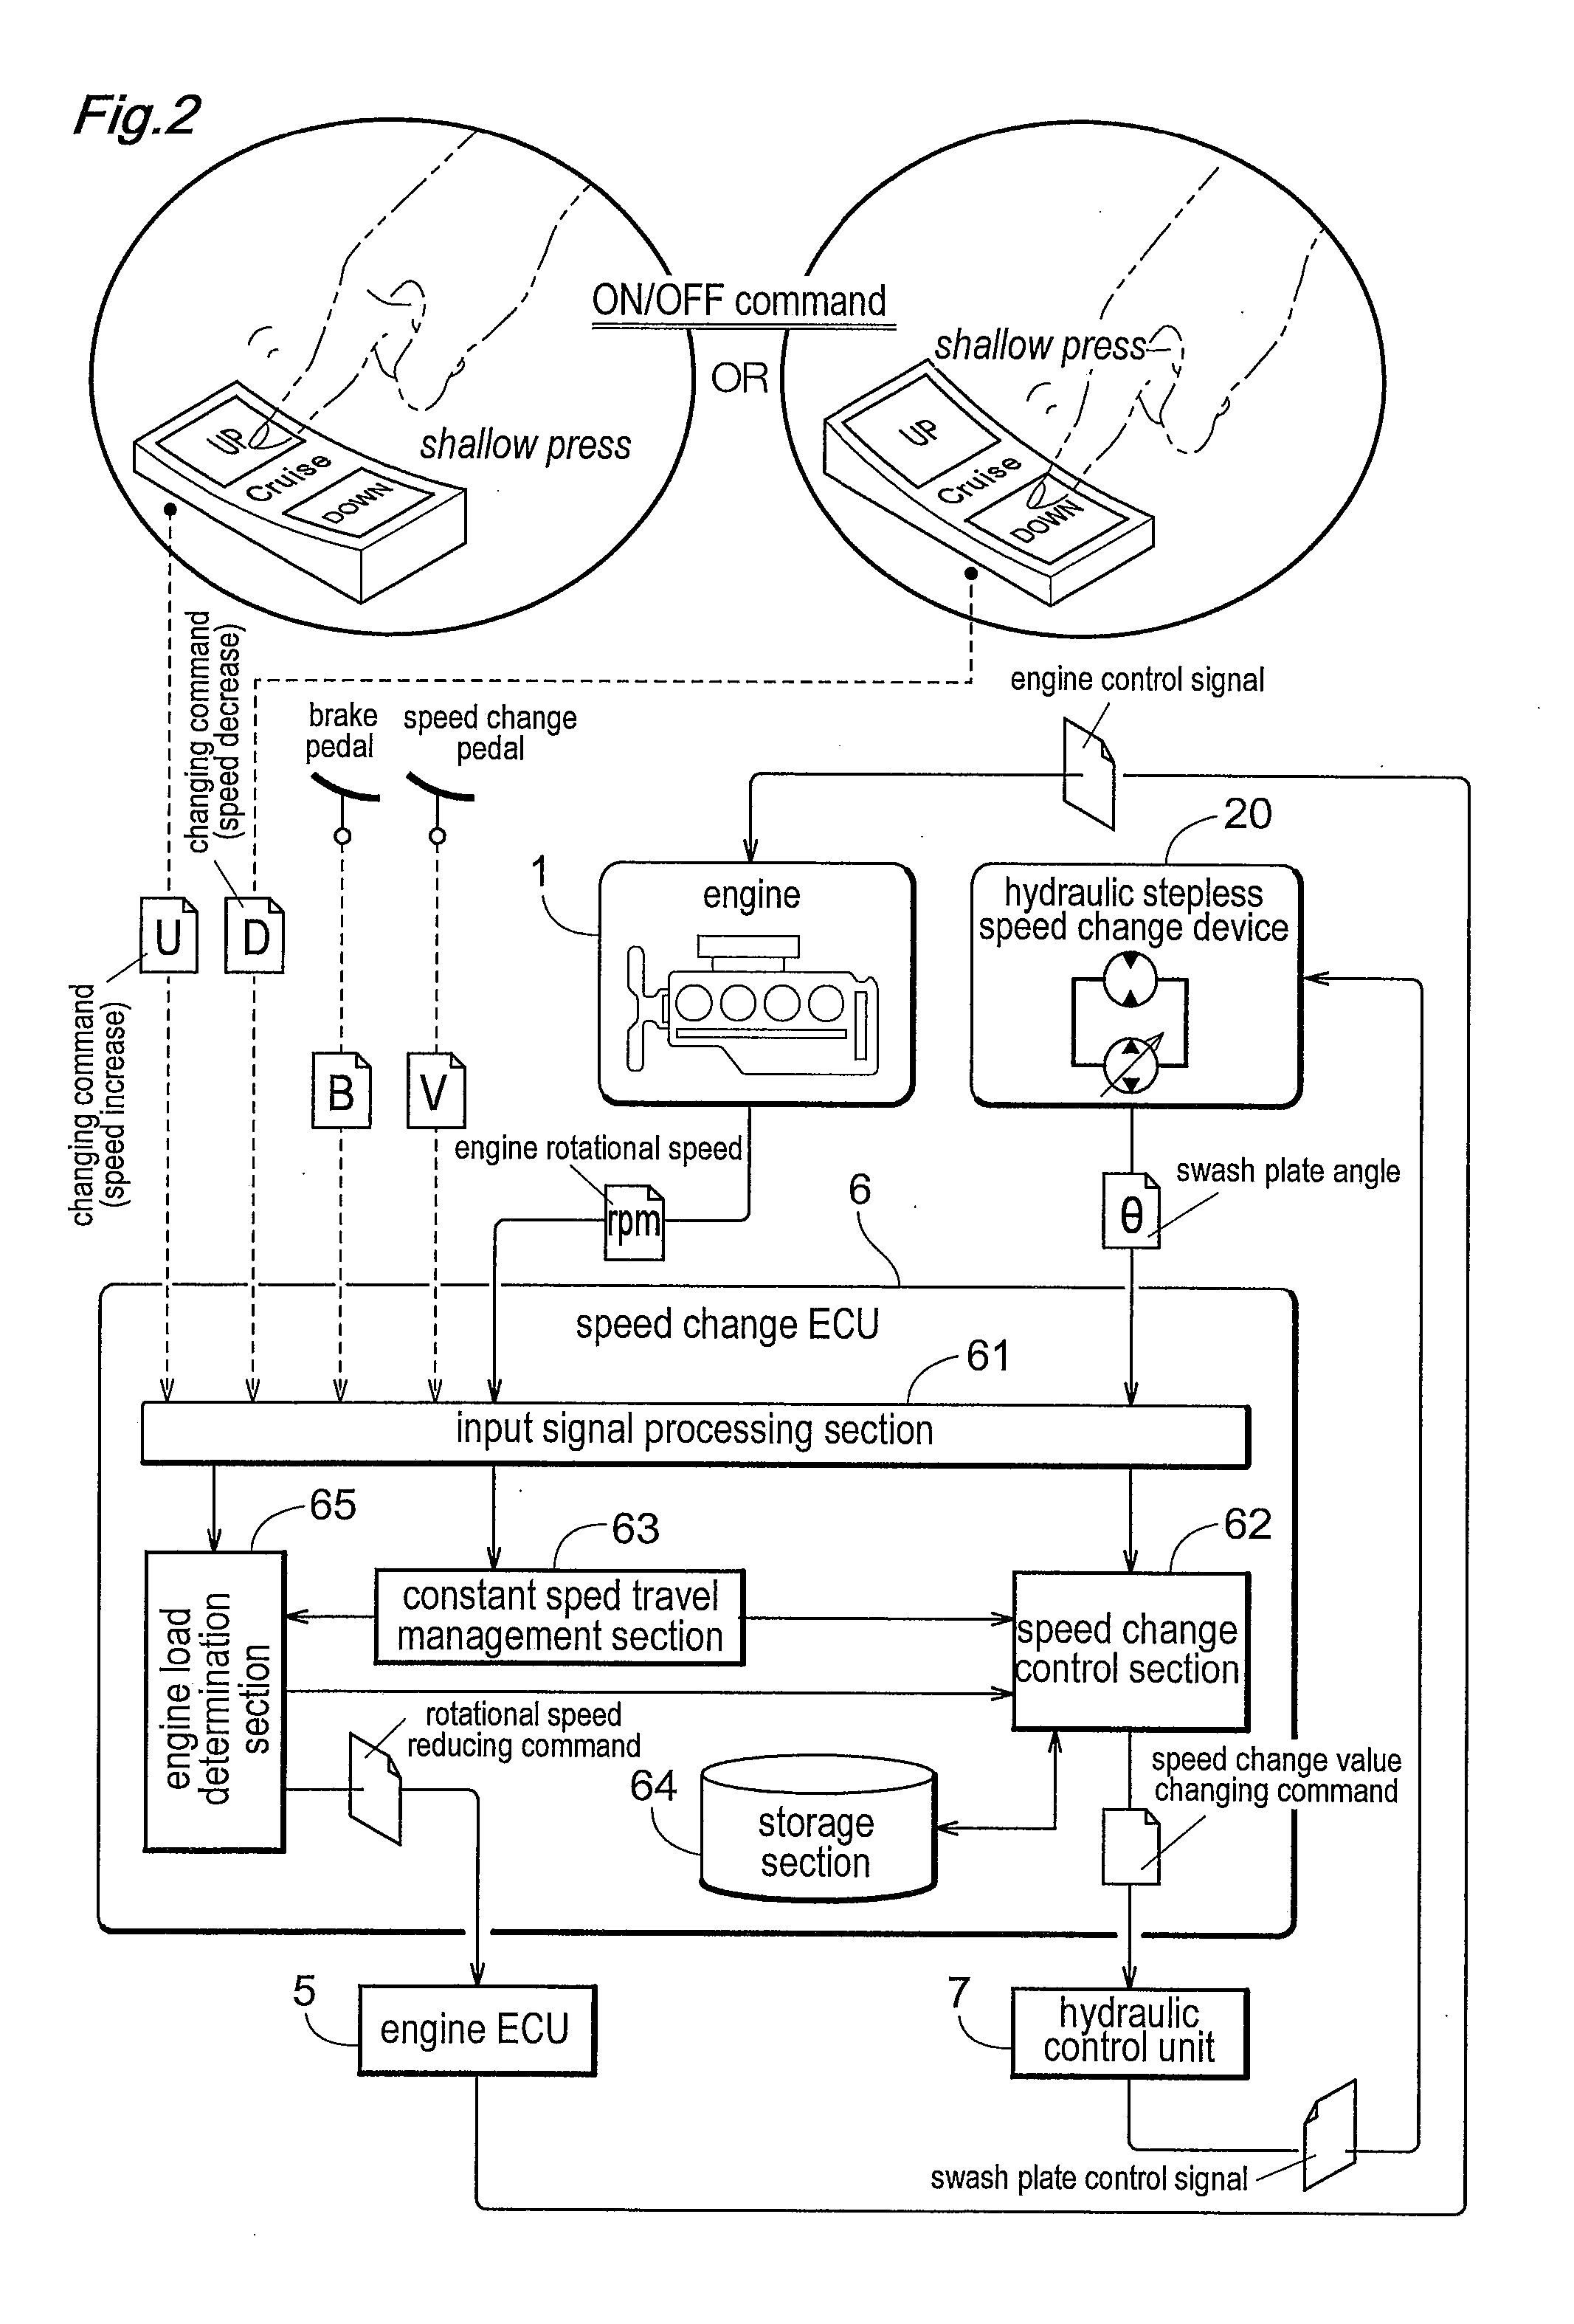 Speed Change Control System for a Vehicle